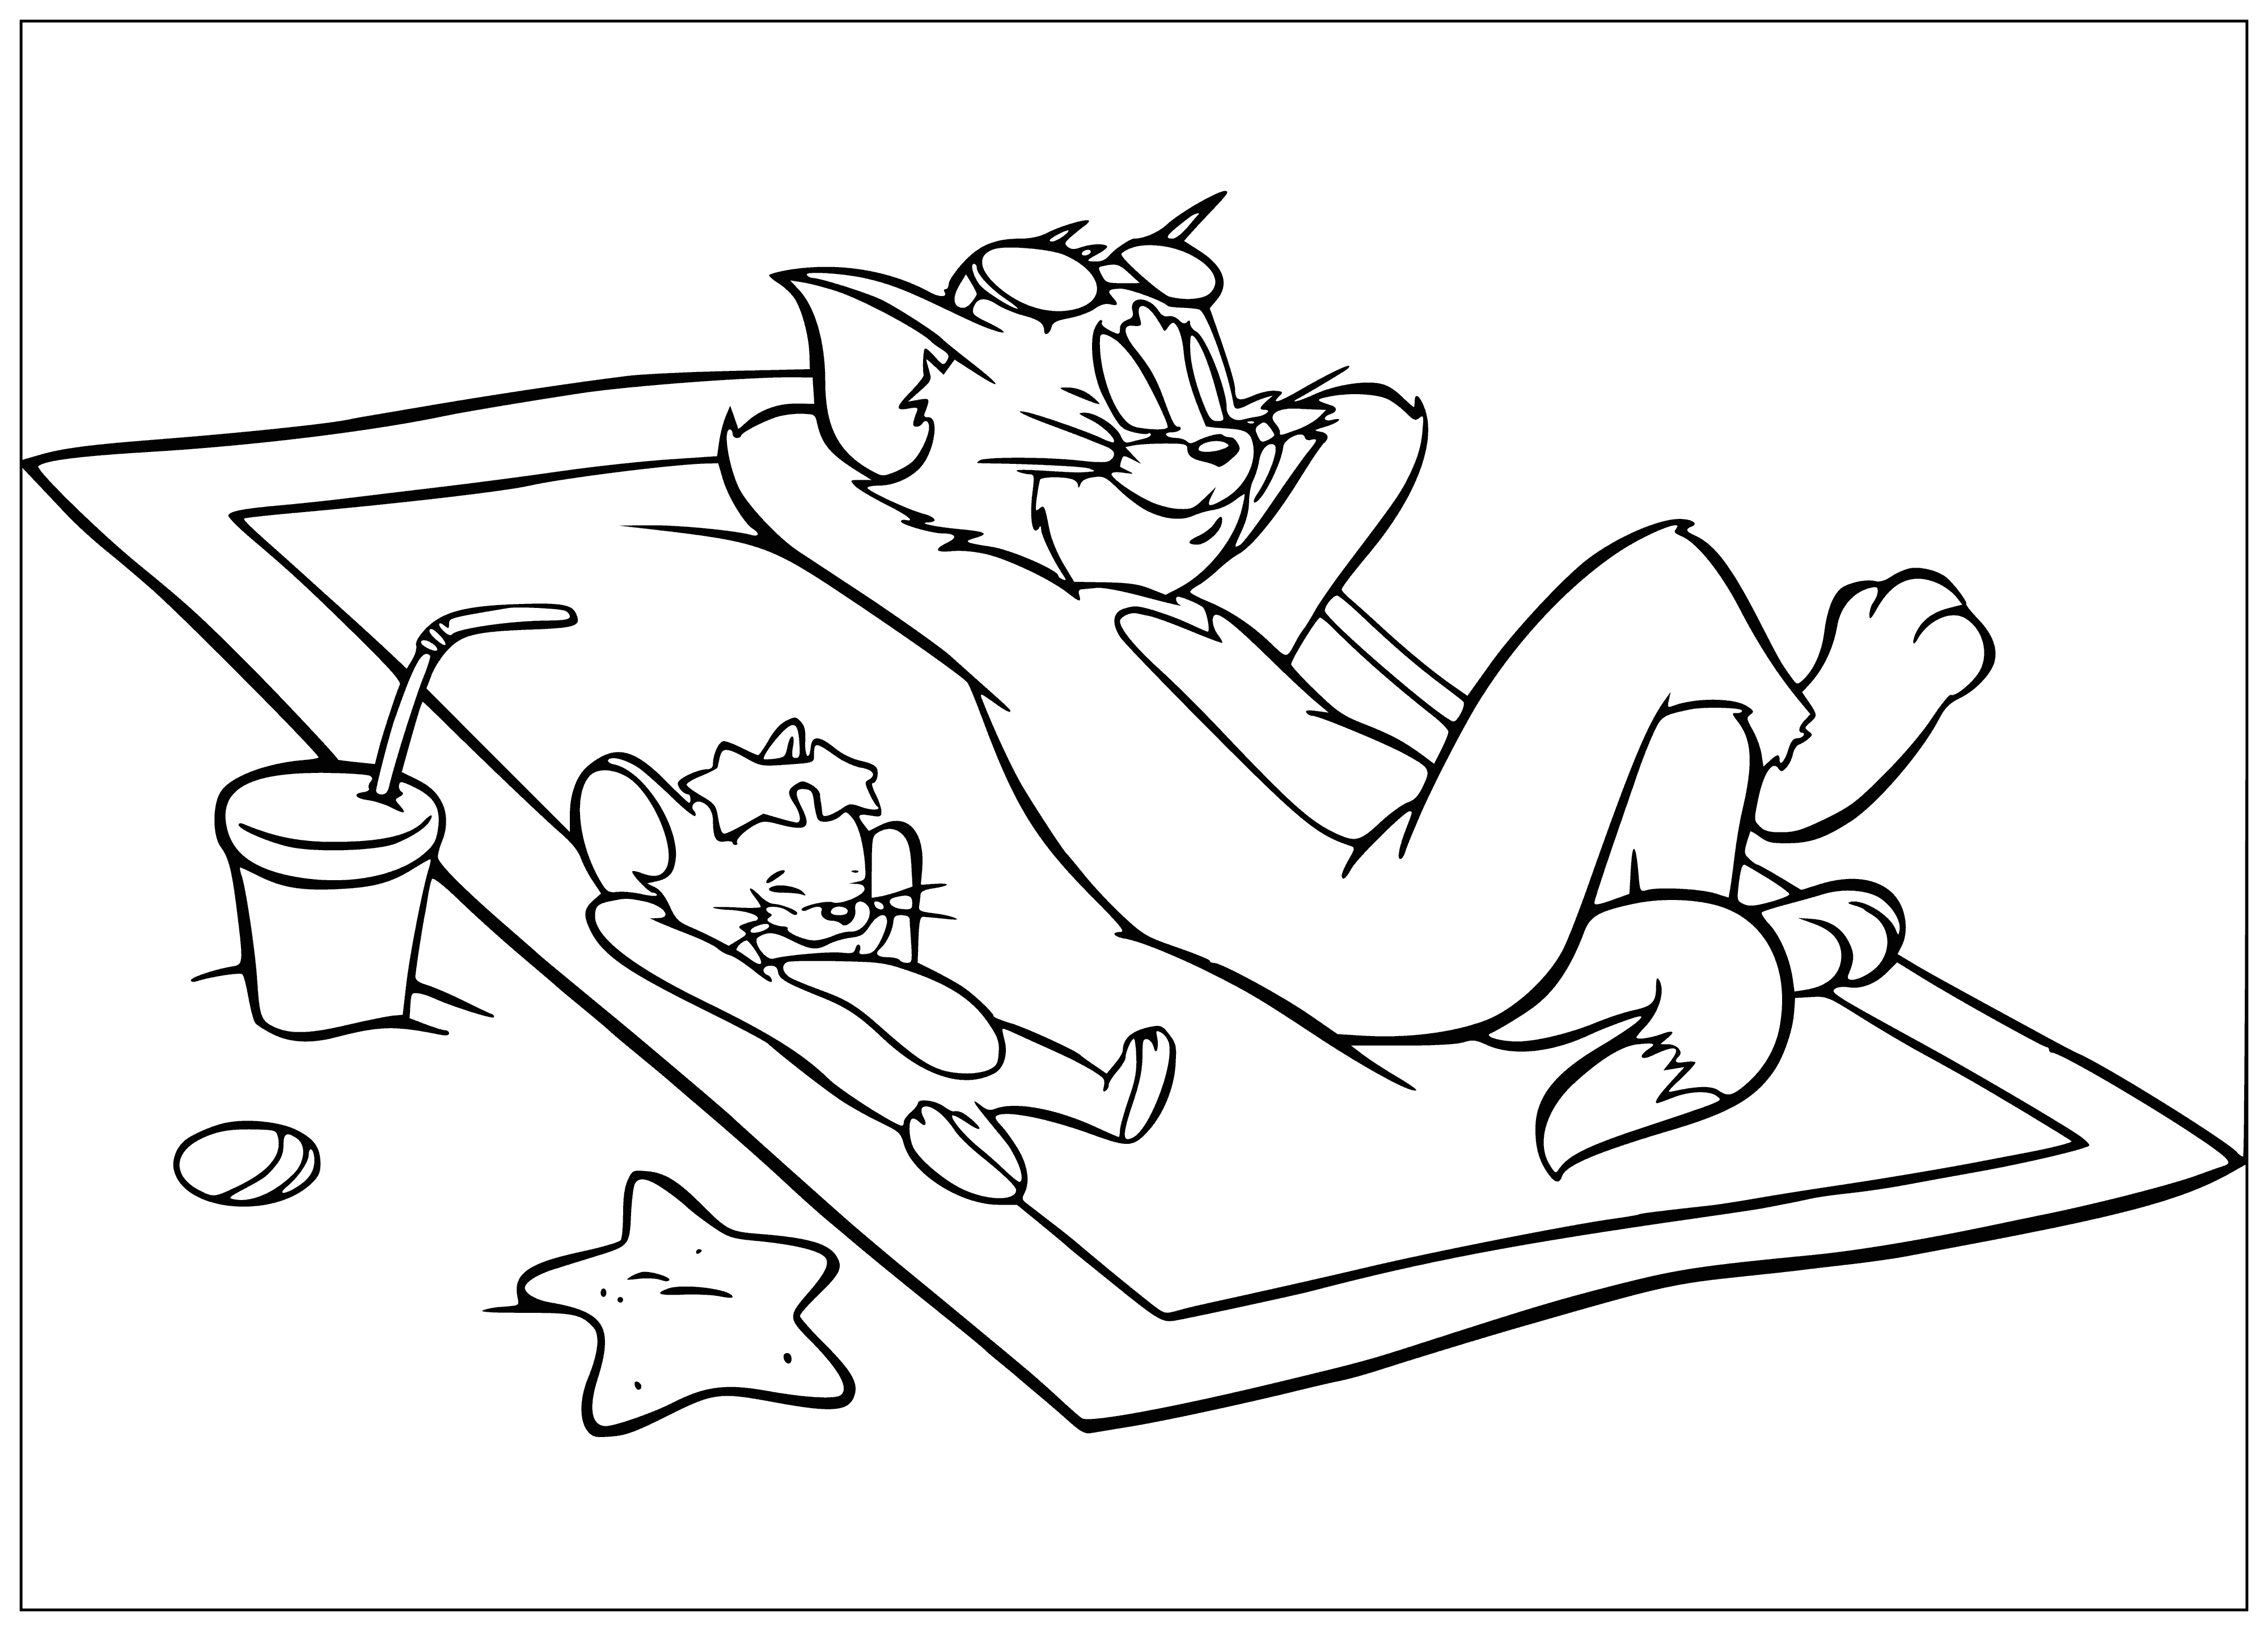 Tom and Jerry on the beach coloring page